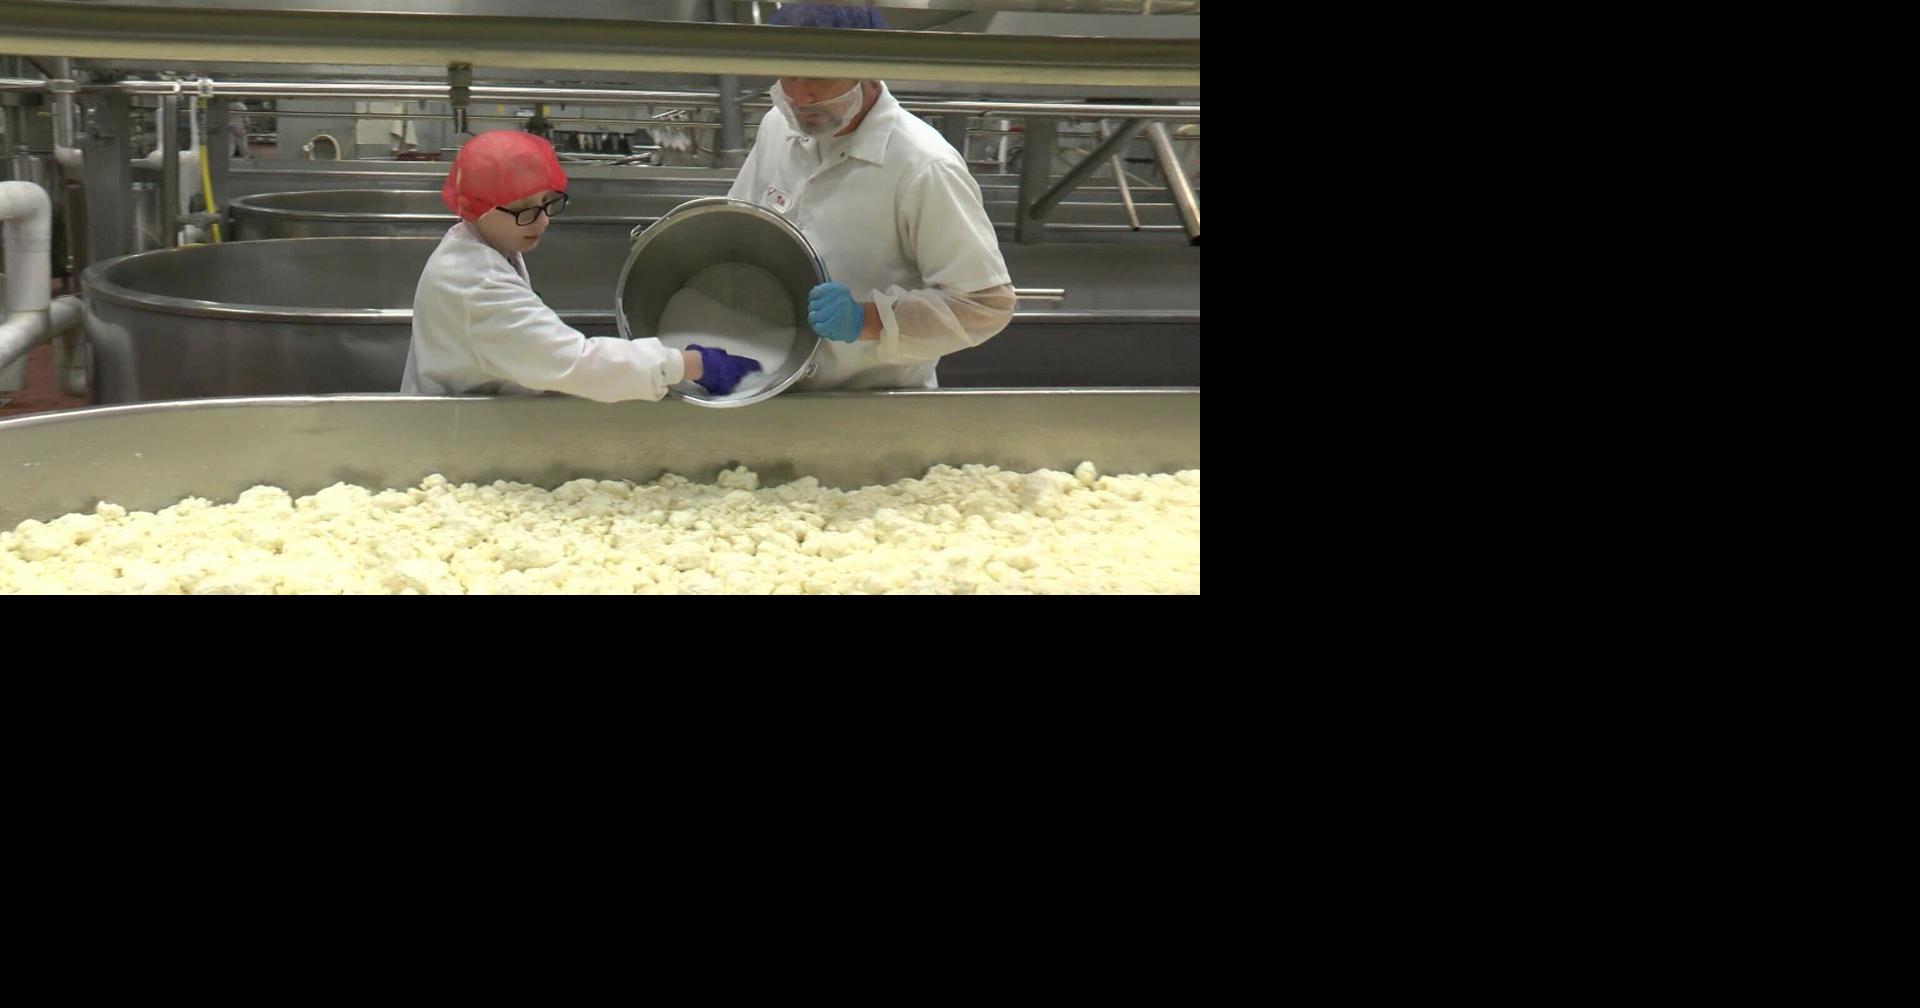 Make-A-Wish Foundation sends North Carolina boy to Wisconsin to be a cheesemaker